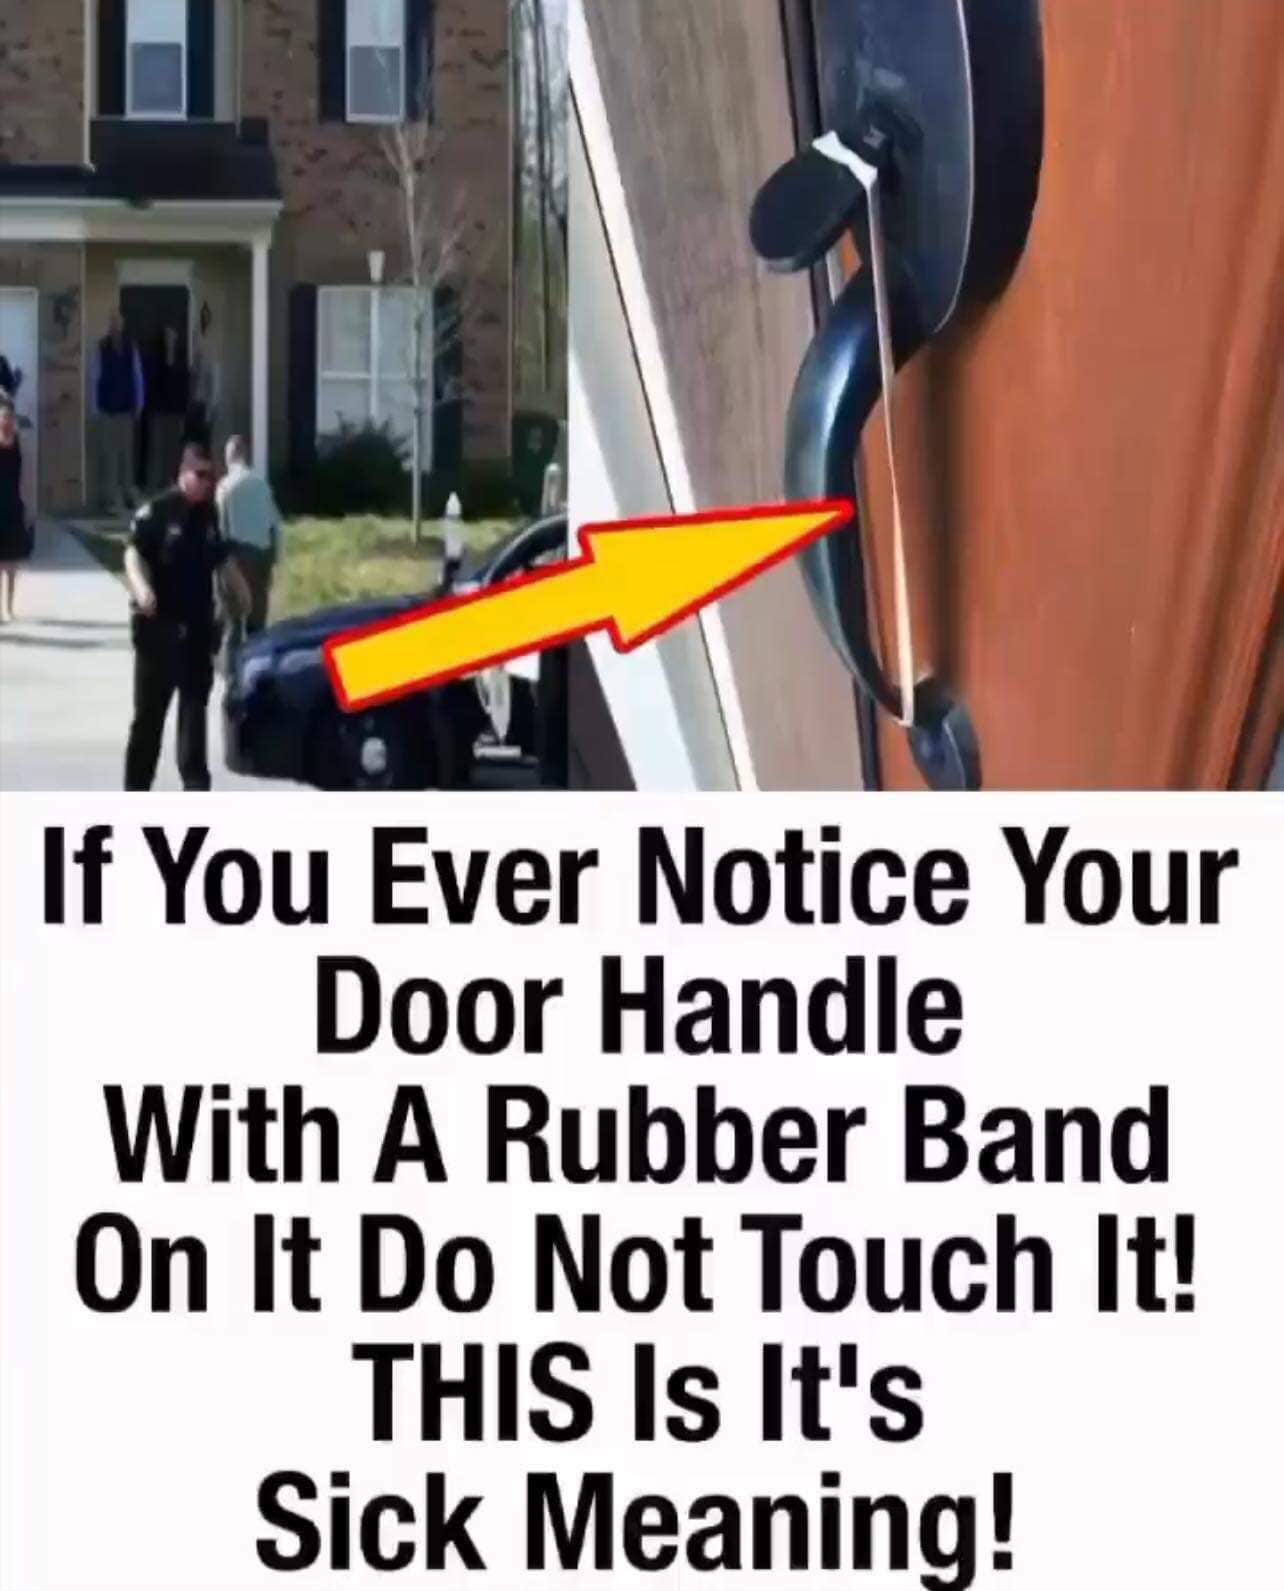 If you ever notice your door handle with a rubber band on it do not touch it